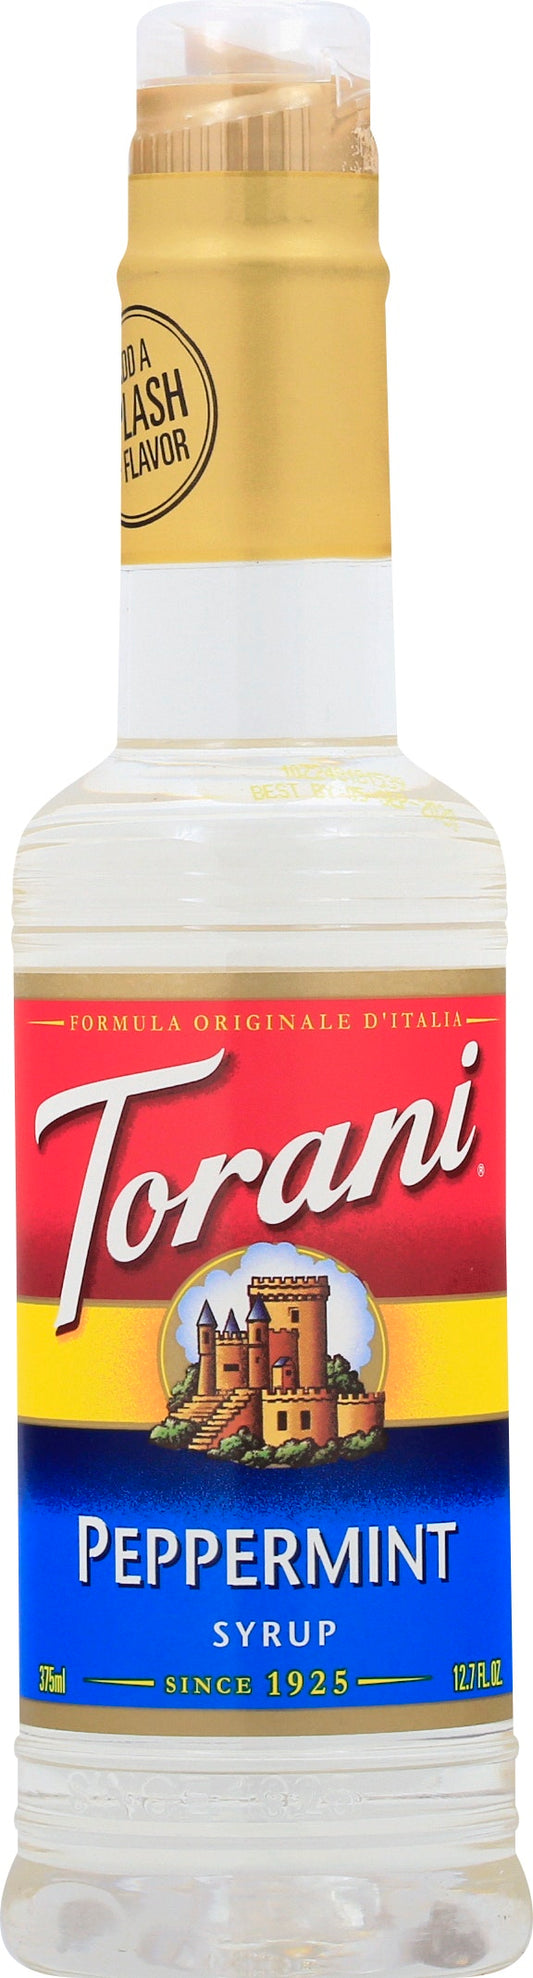 Torani Flavoring Syrup Peppermint - 12.7 Fl. oz (Pack of 4)